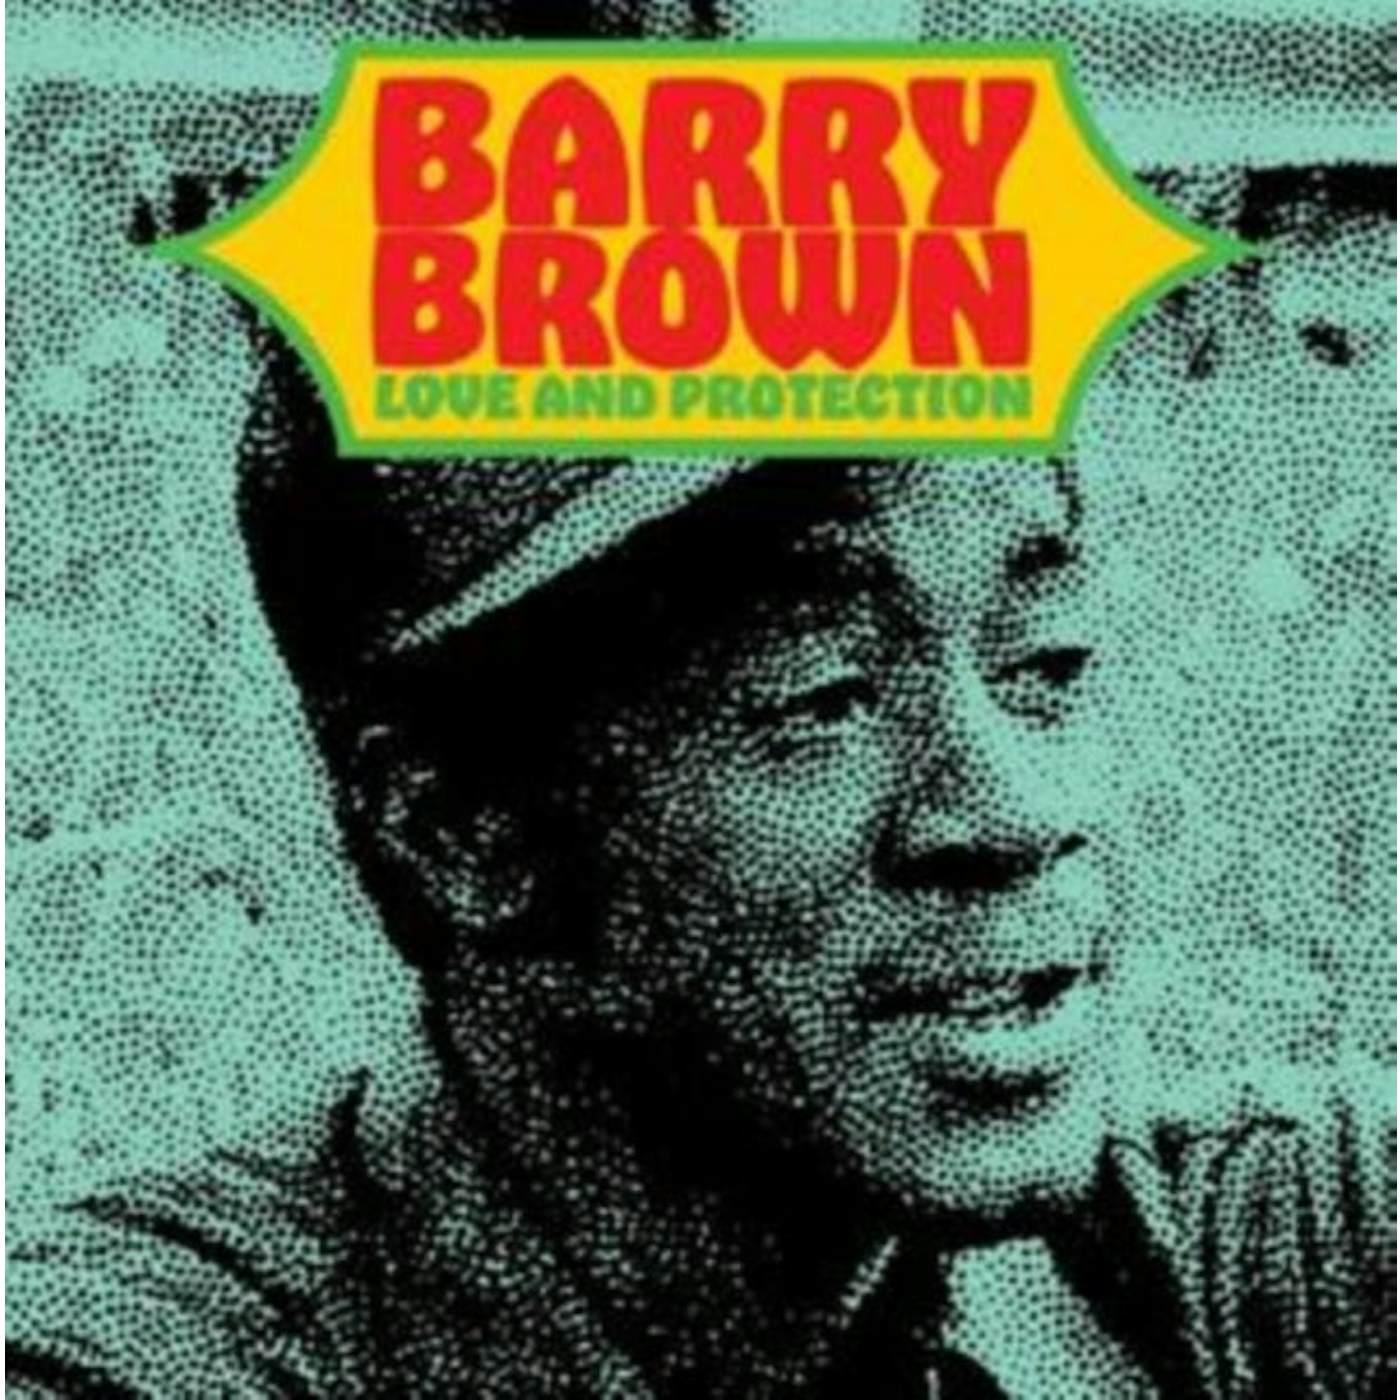  Barry Brown LP - Love And Protection (Vinyl)